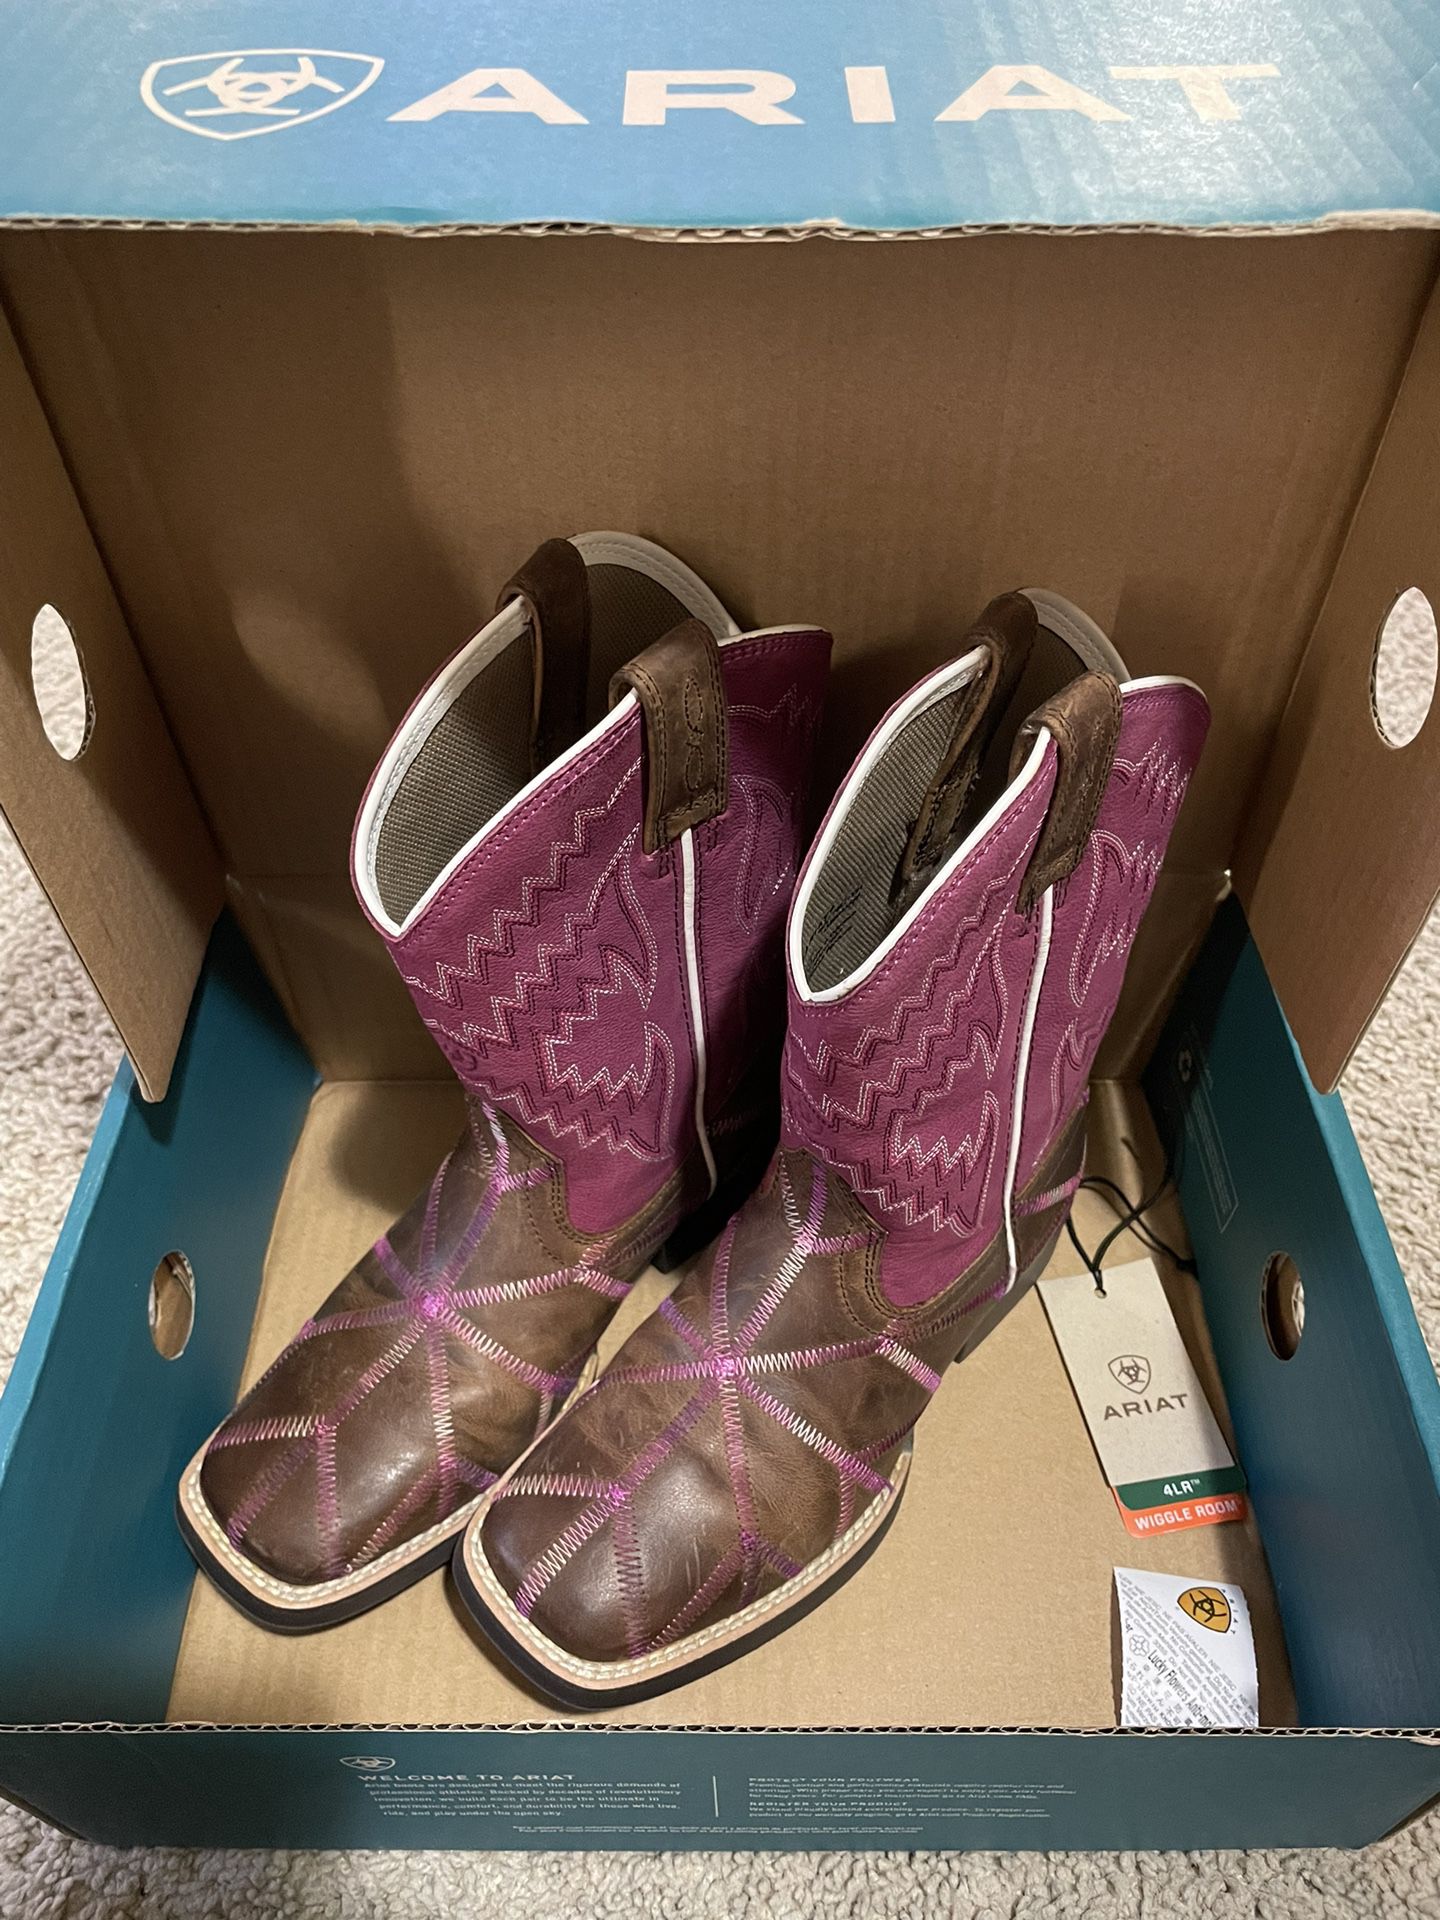 New Ariat Pink And Brown Girls Boots 13.5